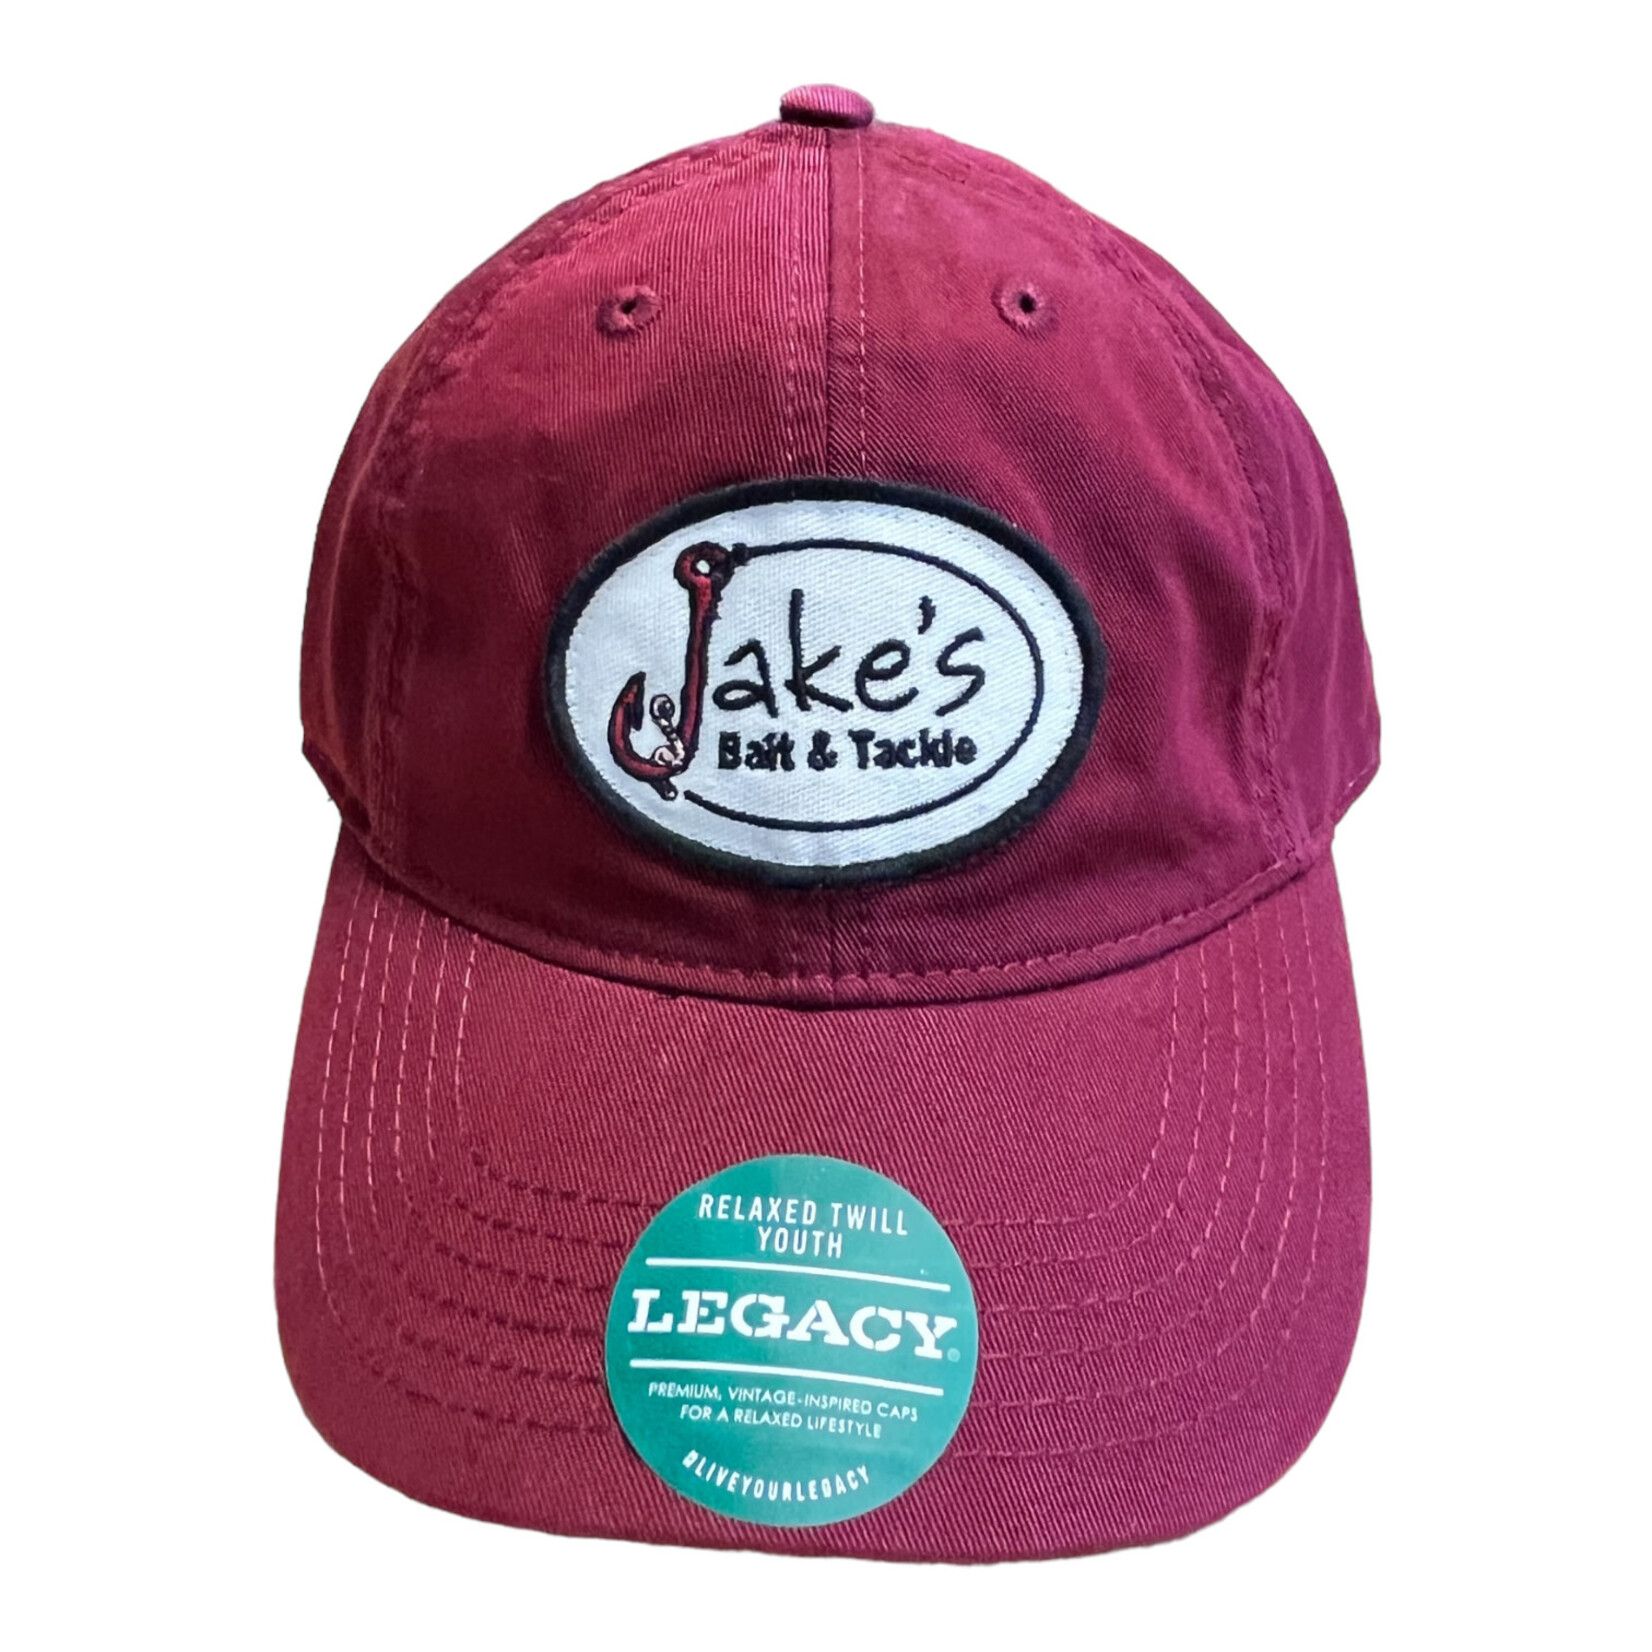 Jake's Bait EZY Relaxed Twill Youth Hat